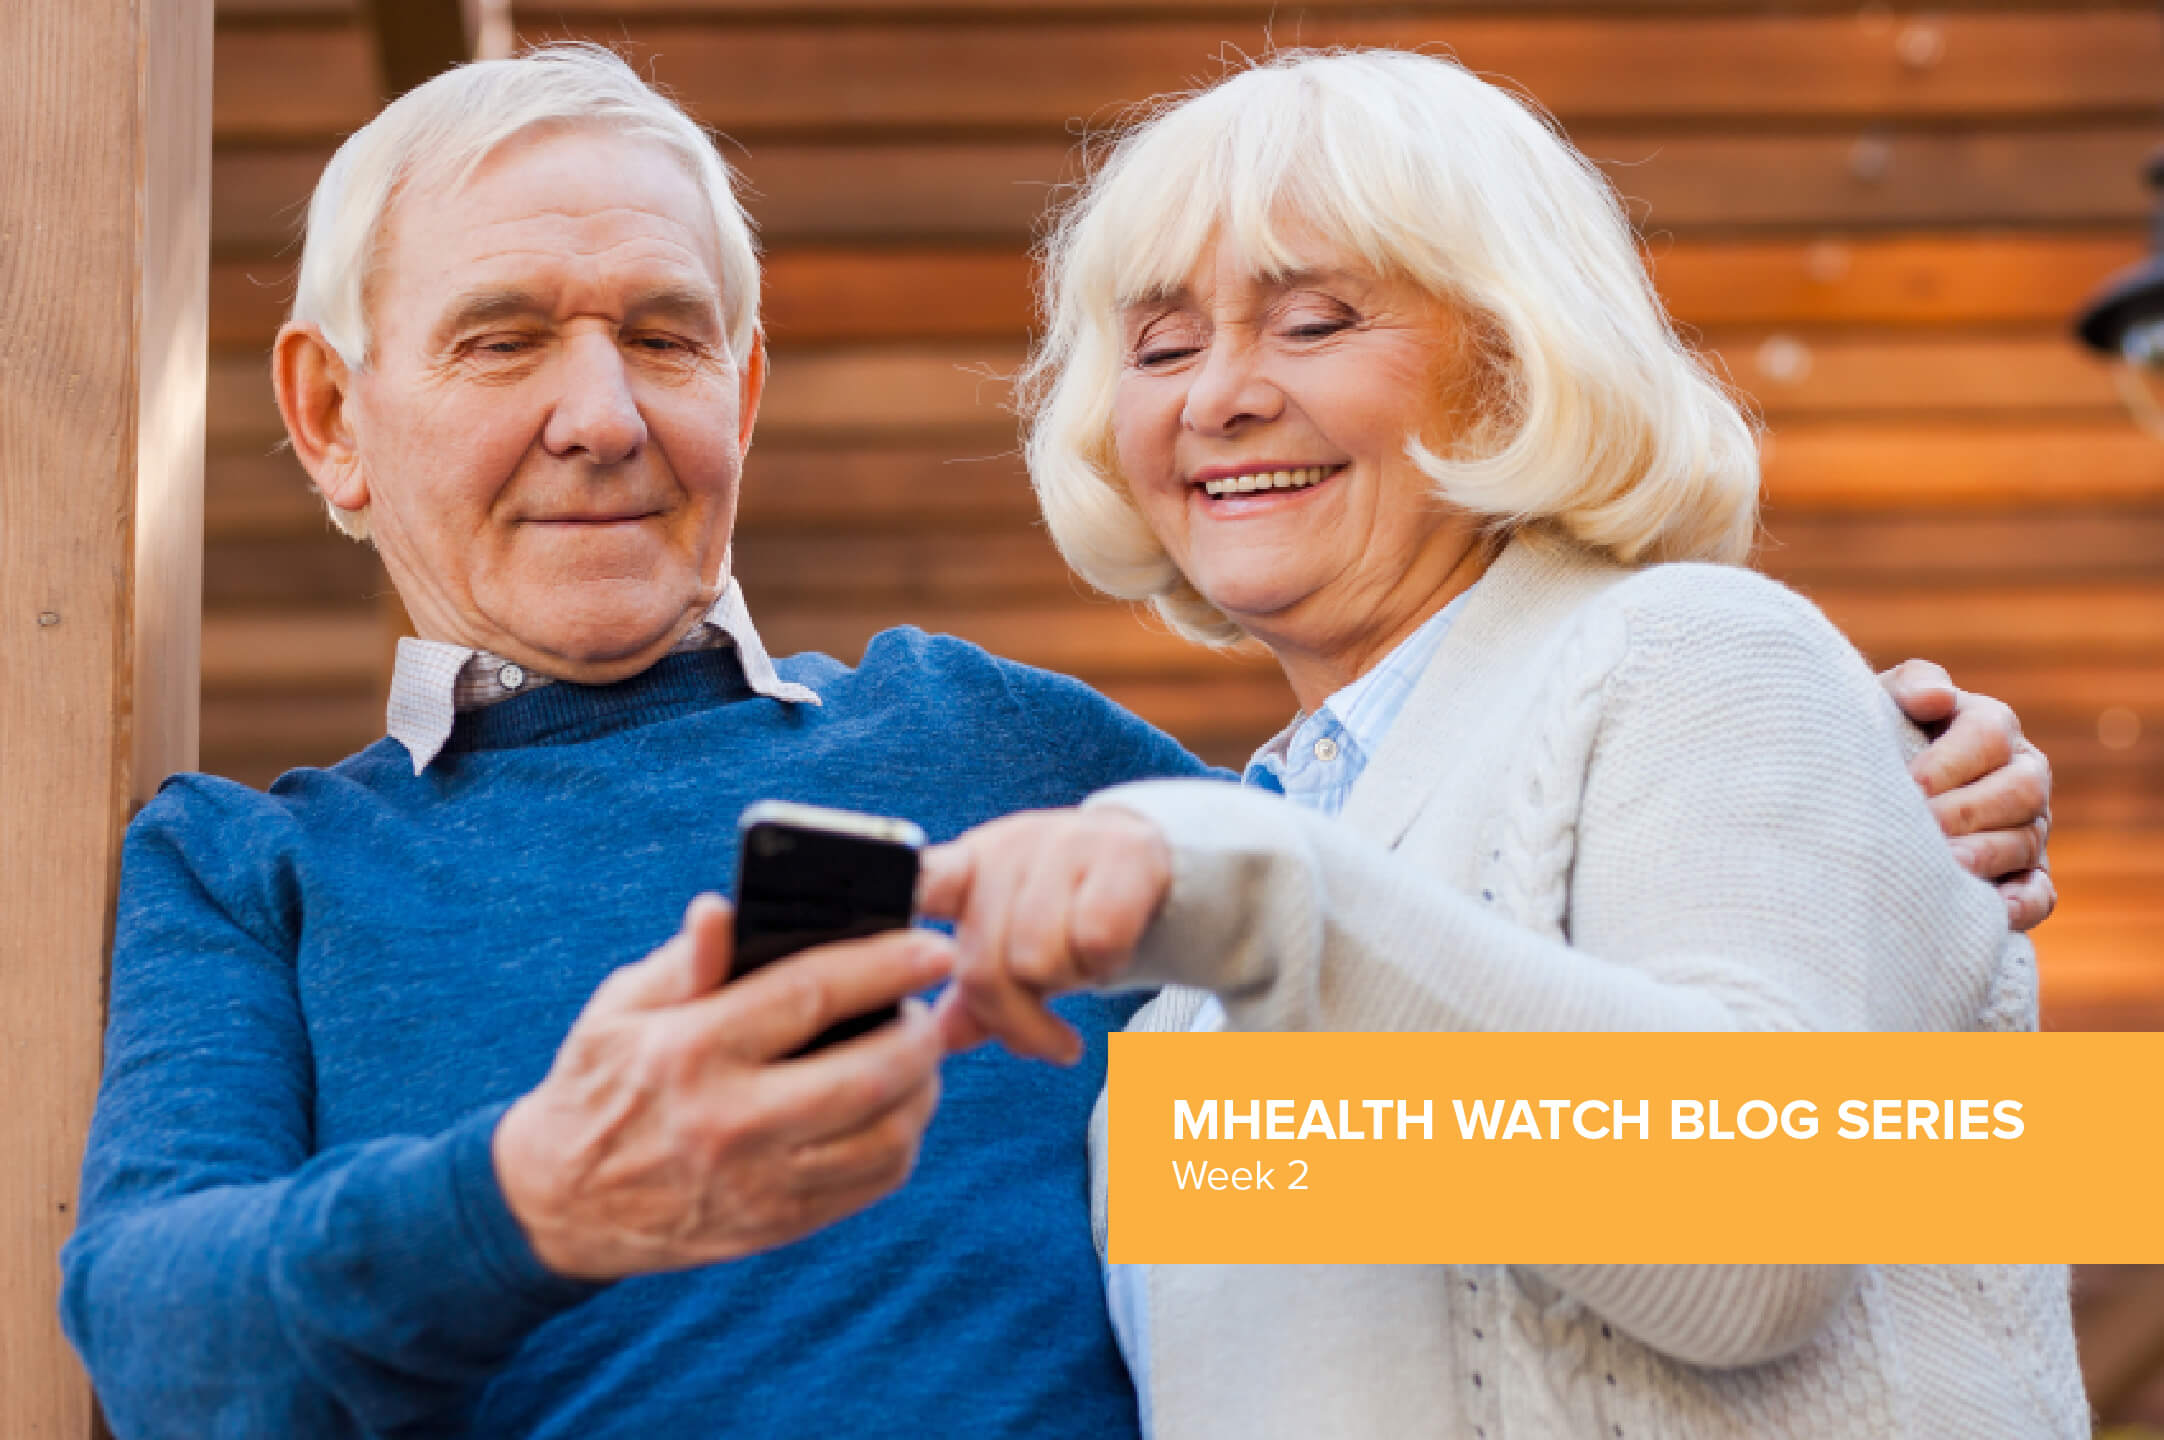 mHealth Watch Blog Series Week 2: Clients and Care Plans